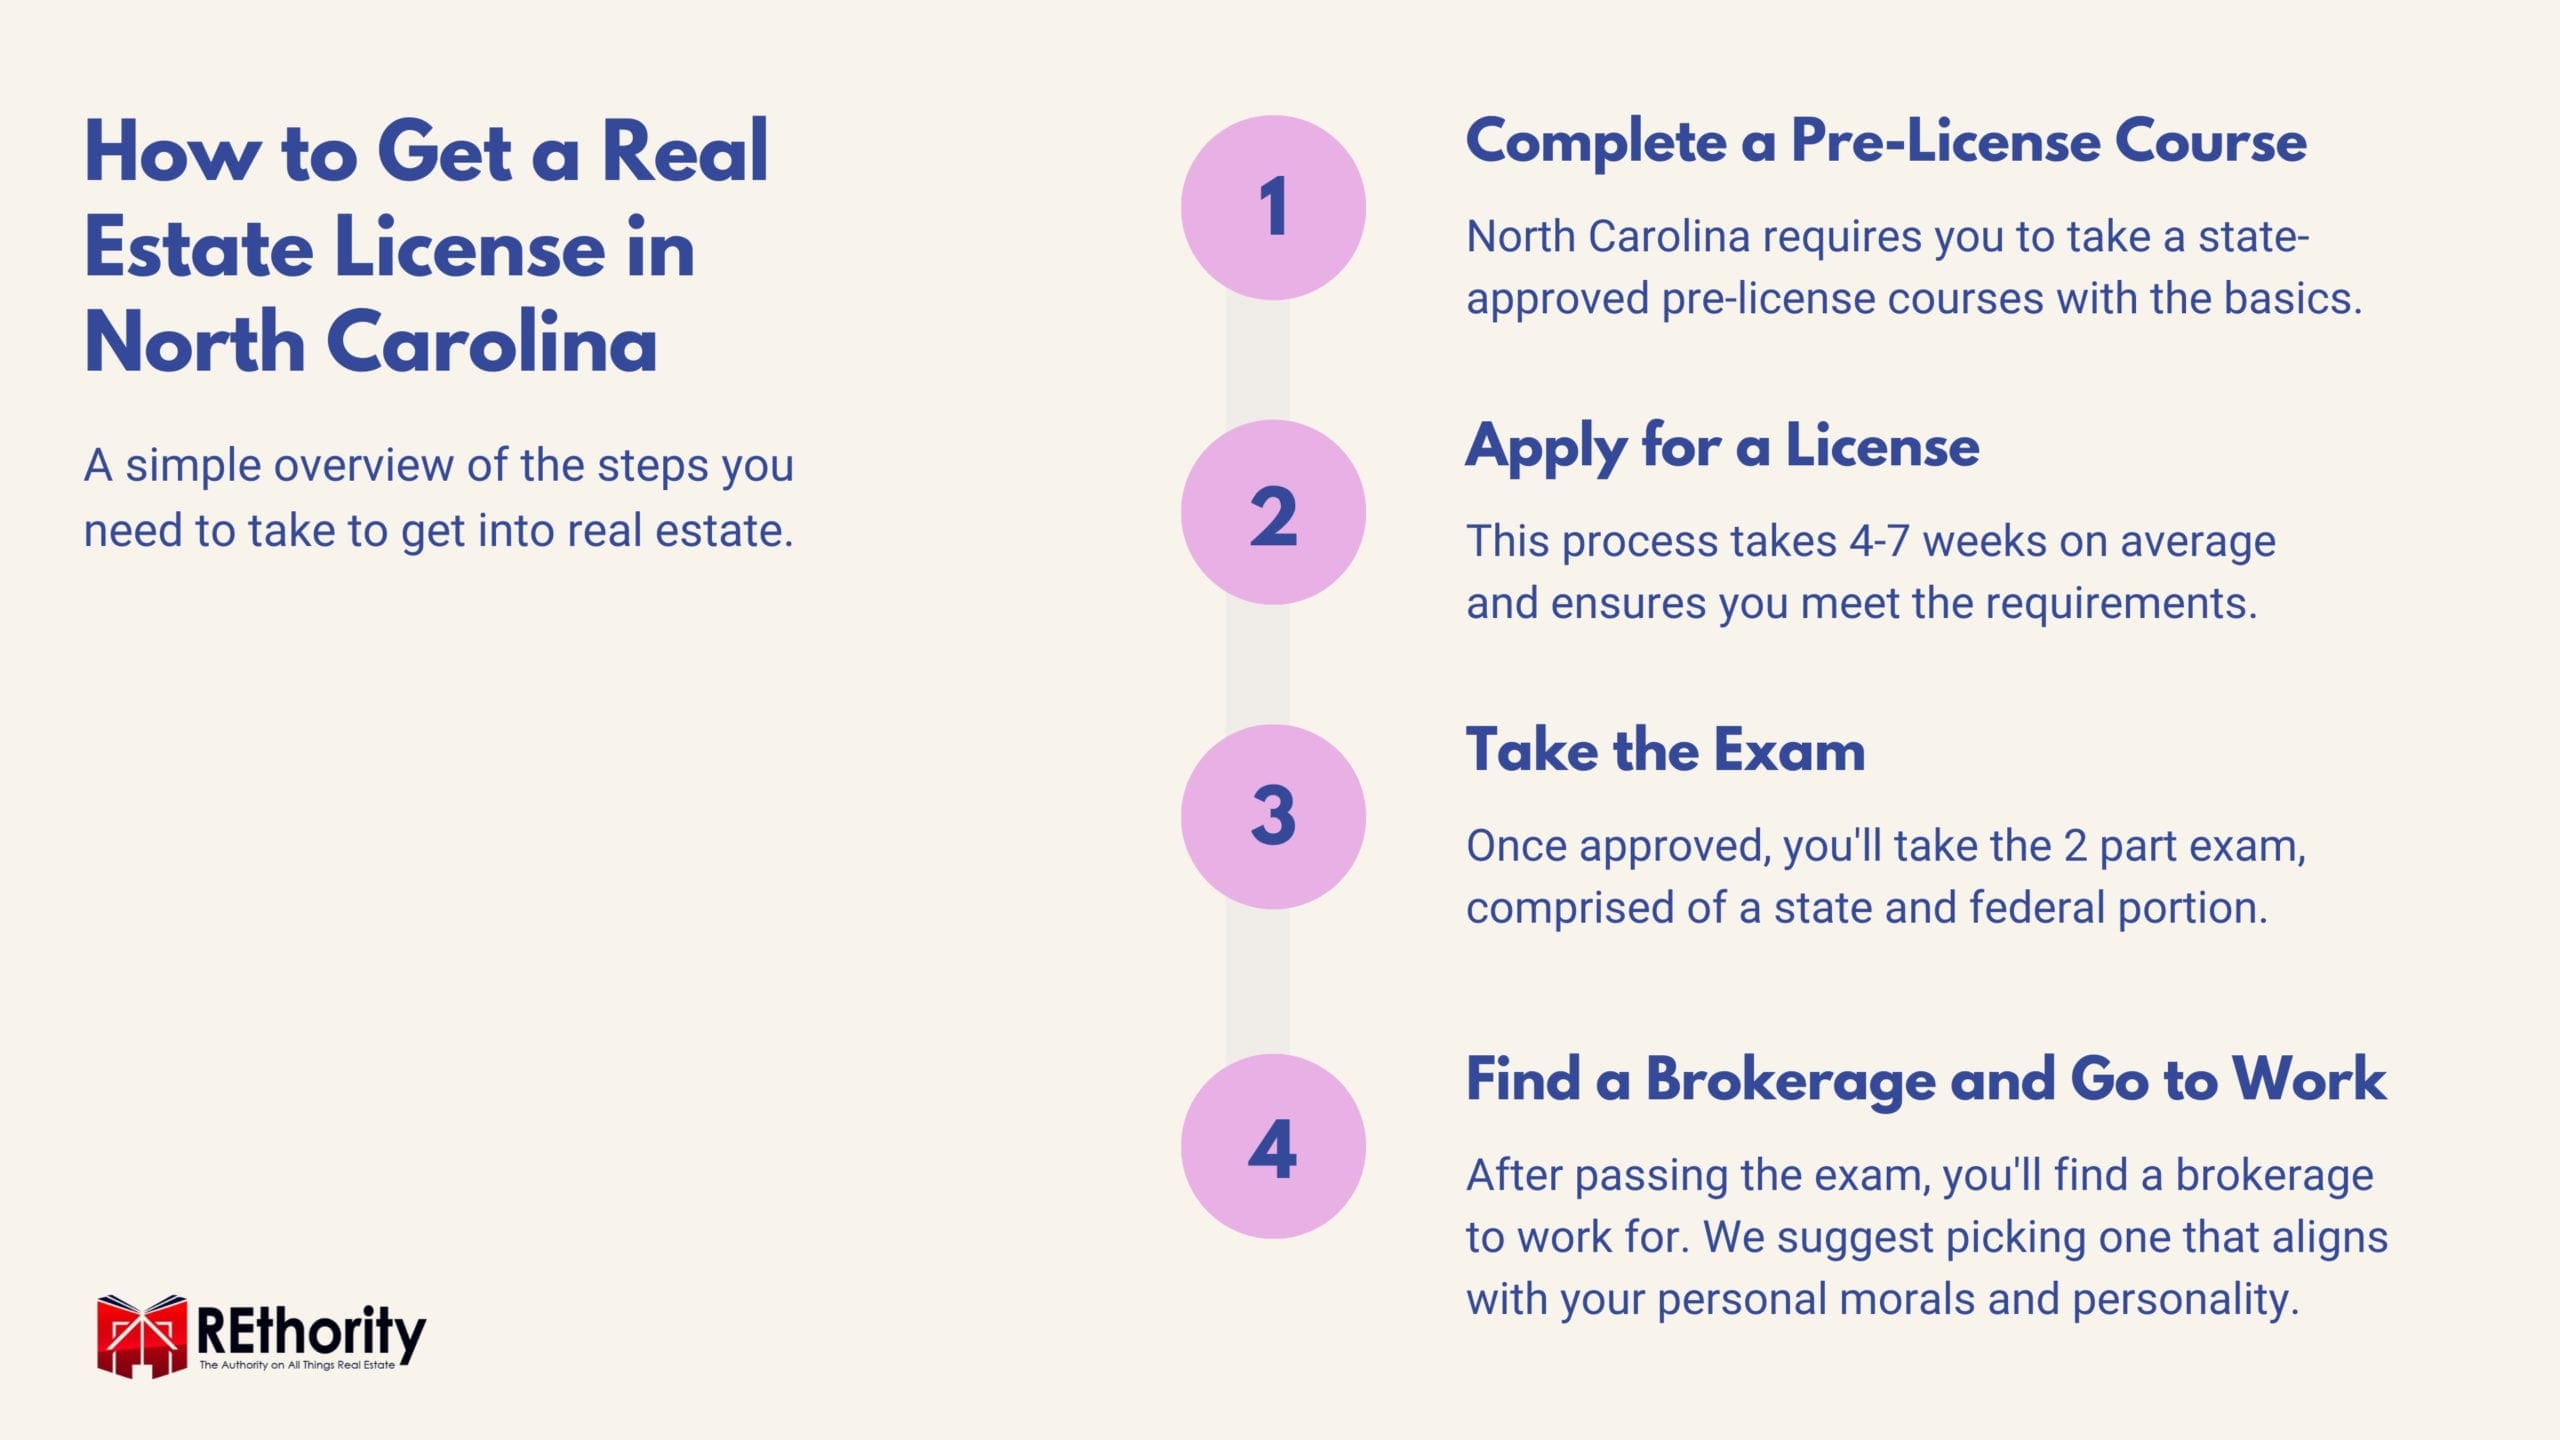 How to Get a Real Estate License in North Carolina steps